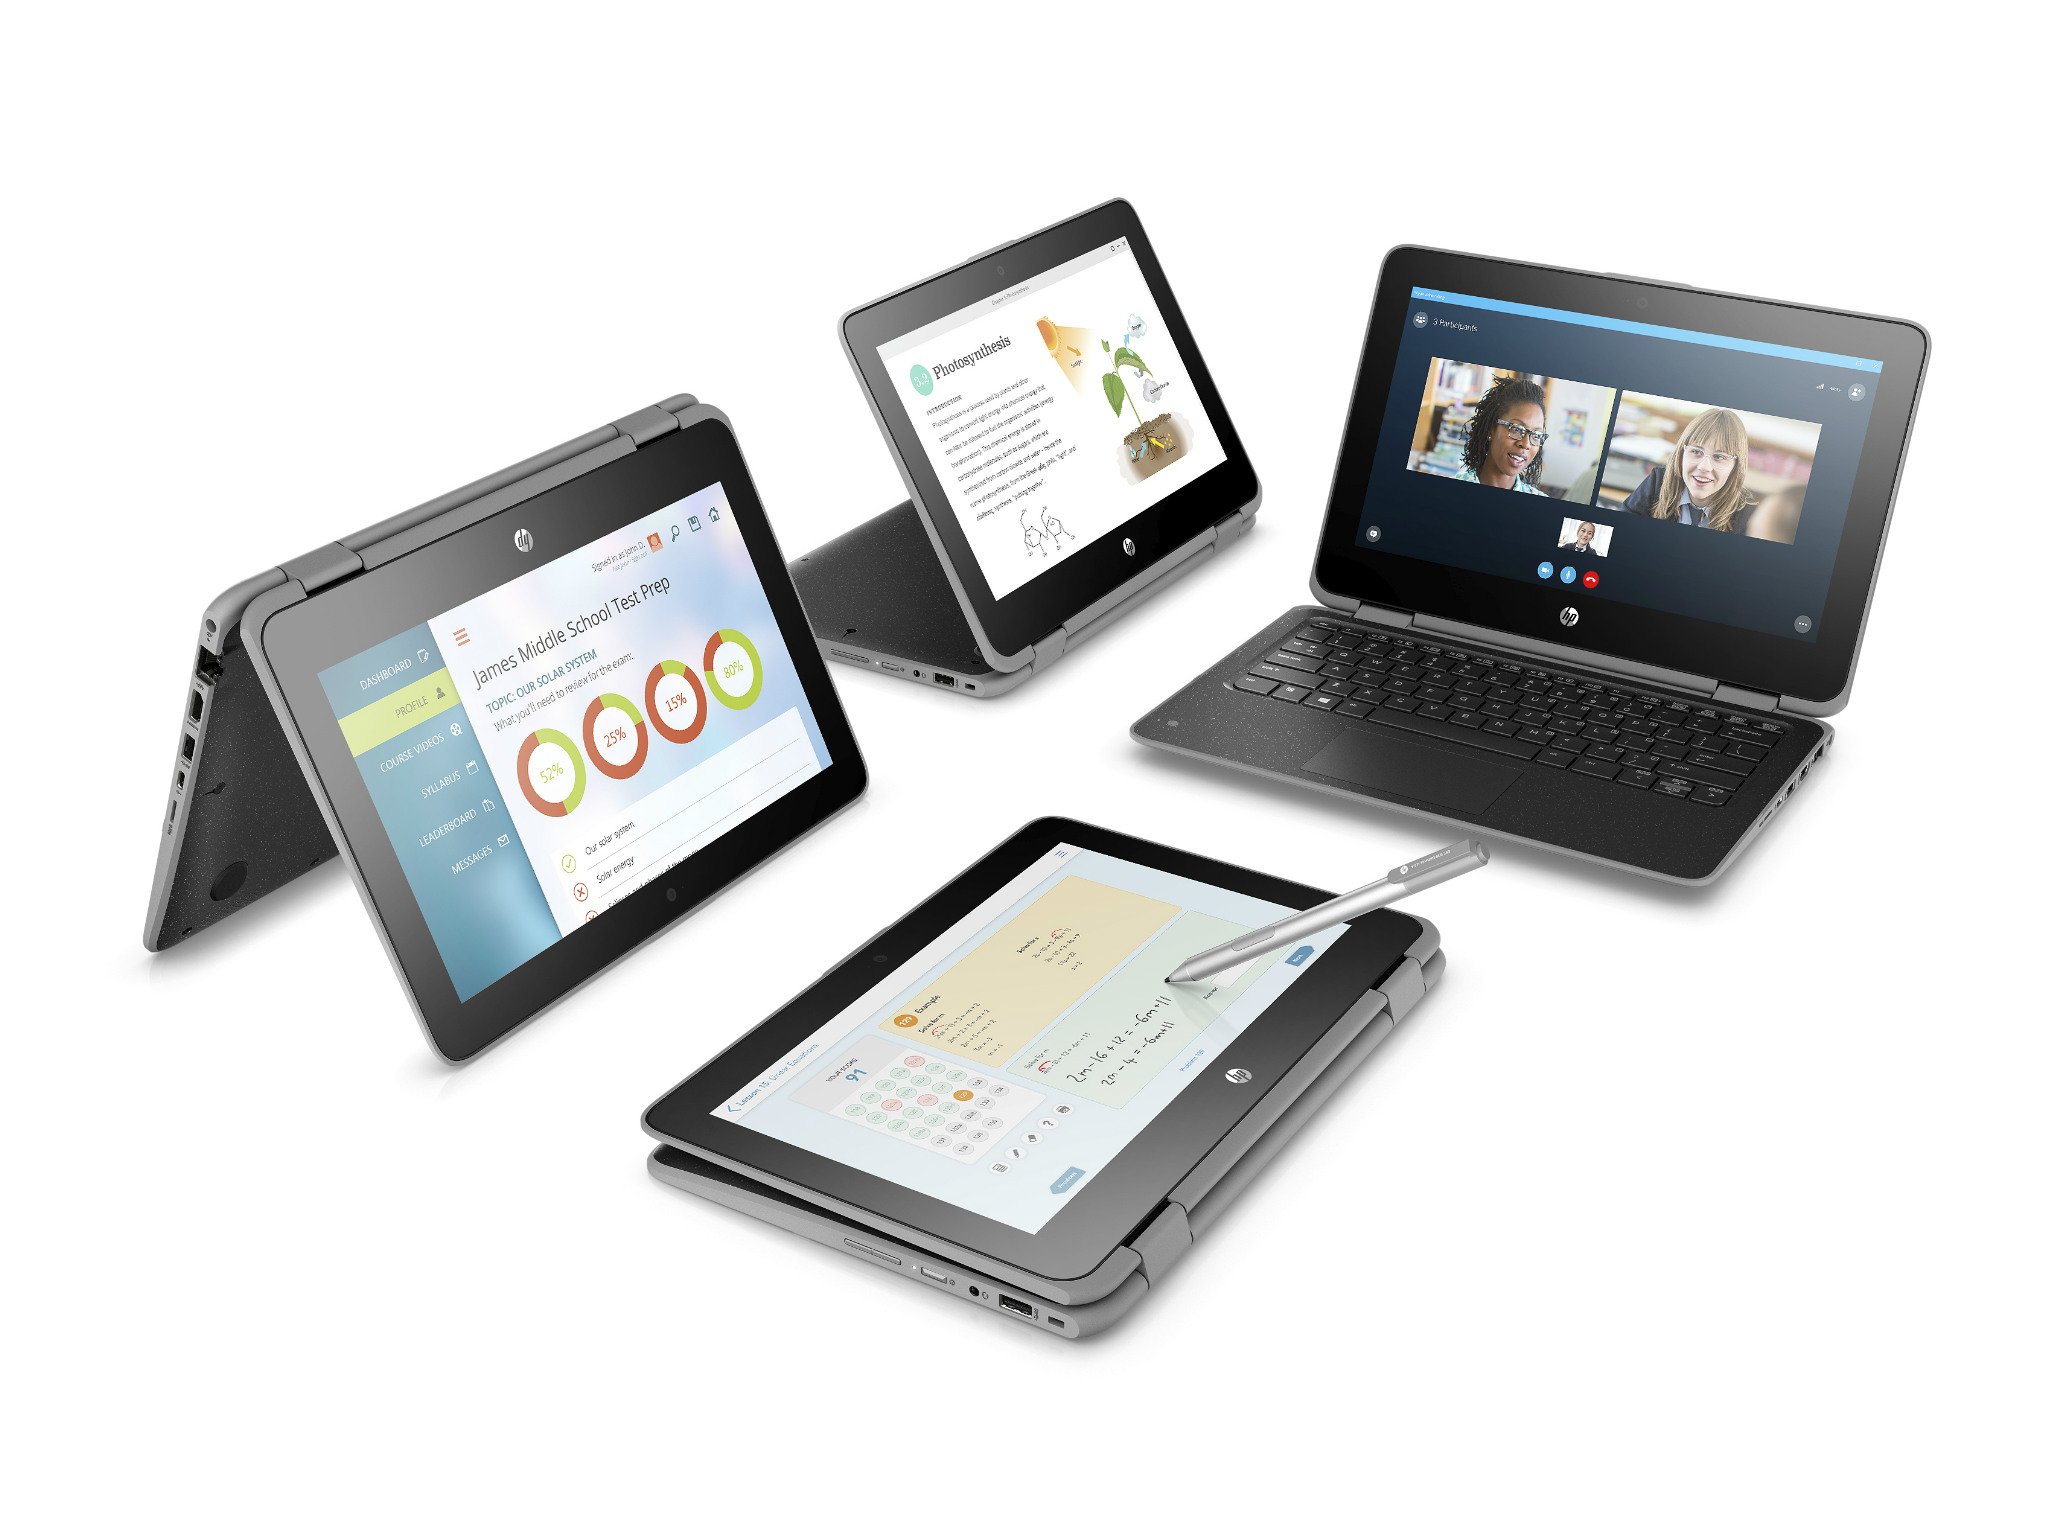 HP debuts new education lineup with ProBook x360 11, Stream 11